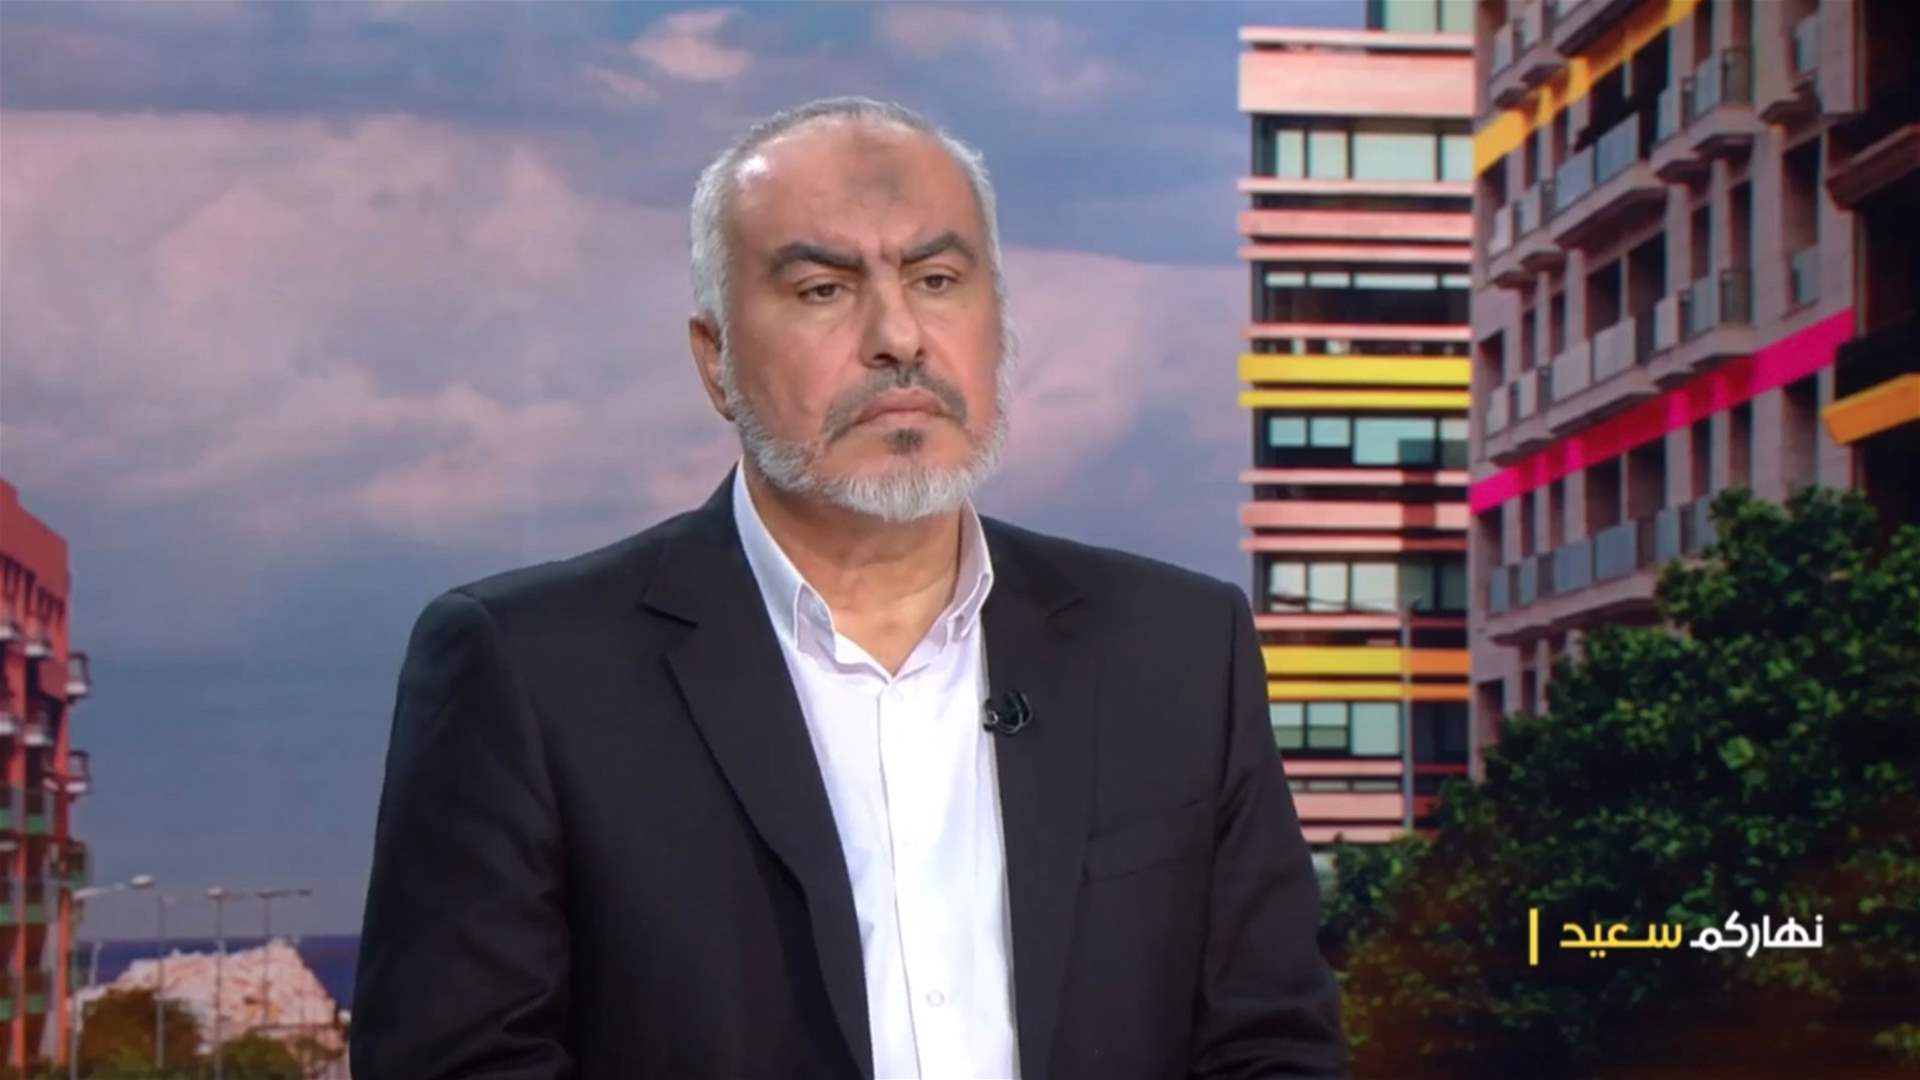 Member of Hamas&#39; political bureau to LBCI: The international community treats Israel as if it were a spoiled child that cannot be punished